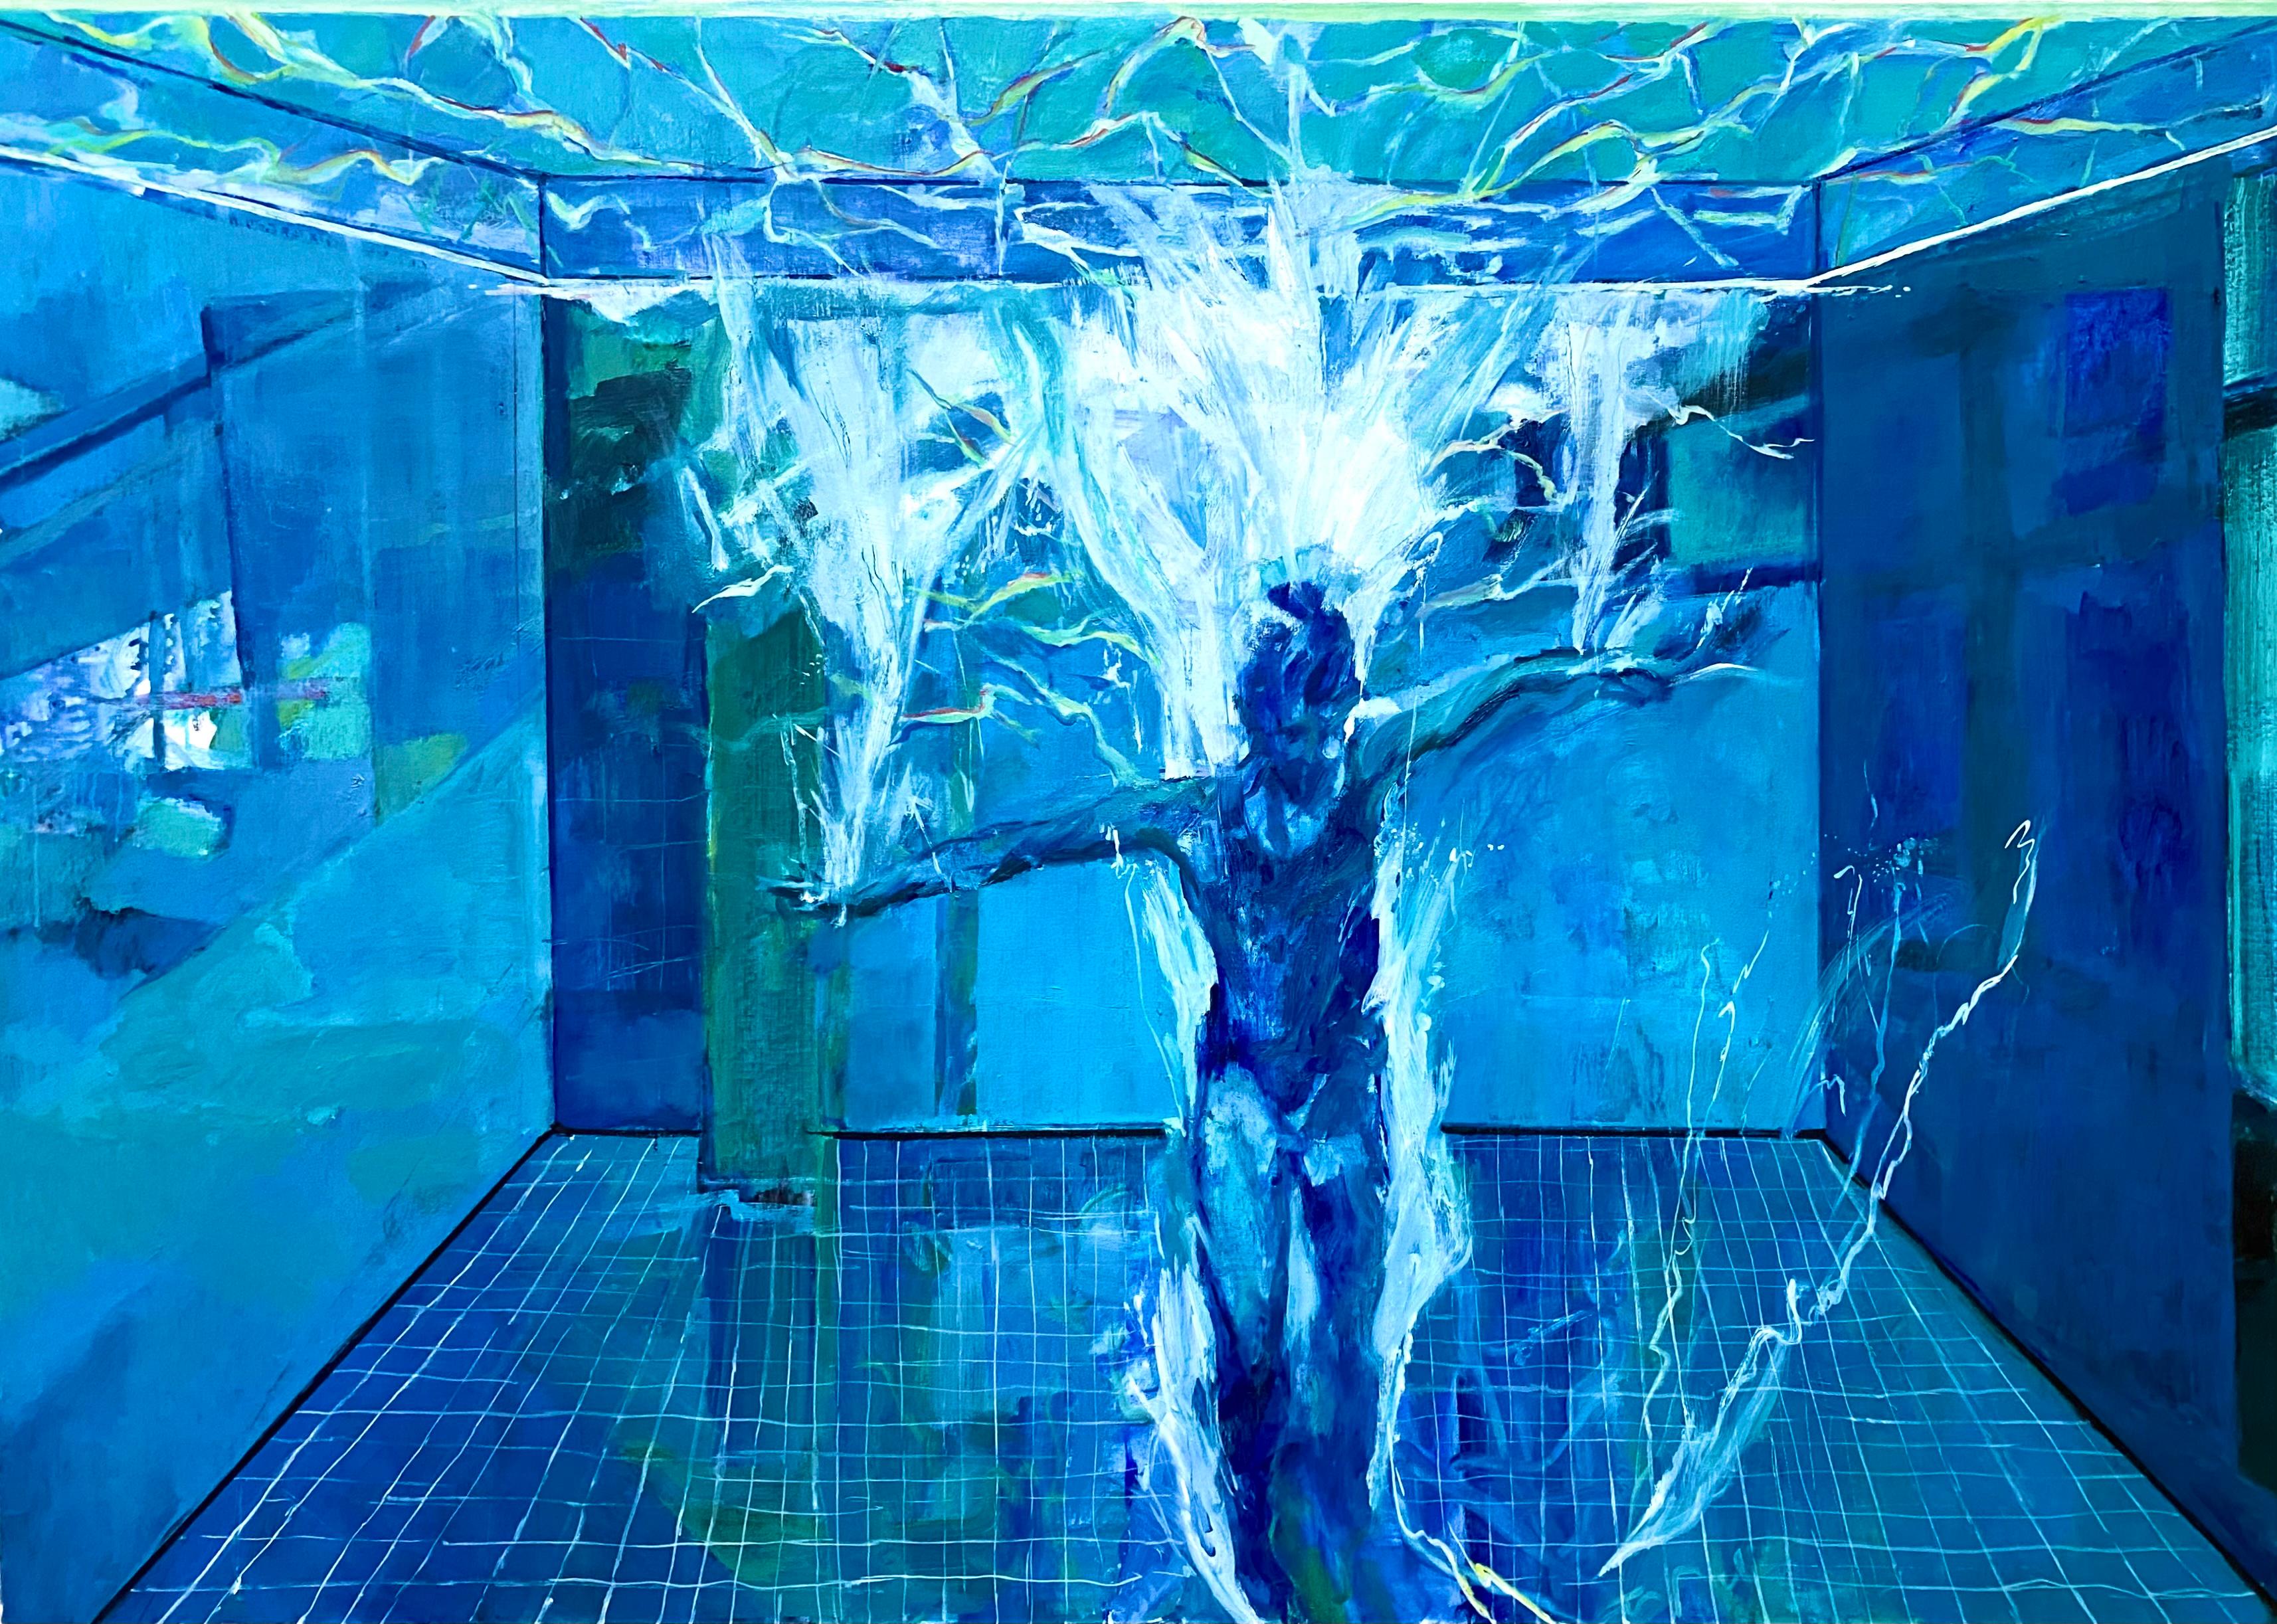 Immersion, 120x170cm, oil/canvas - Art by Veronica Fedortsova